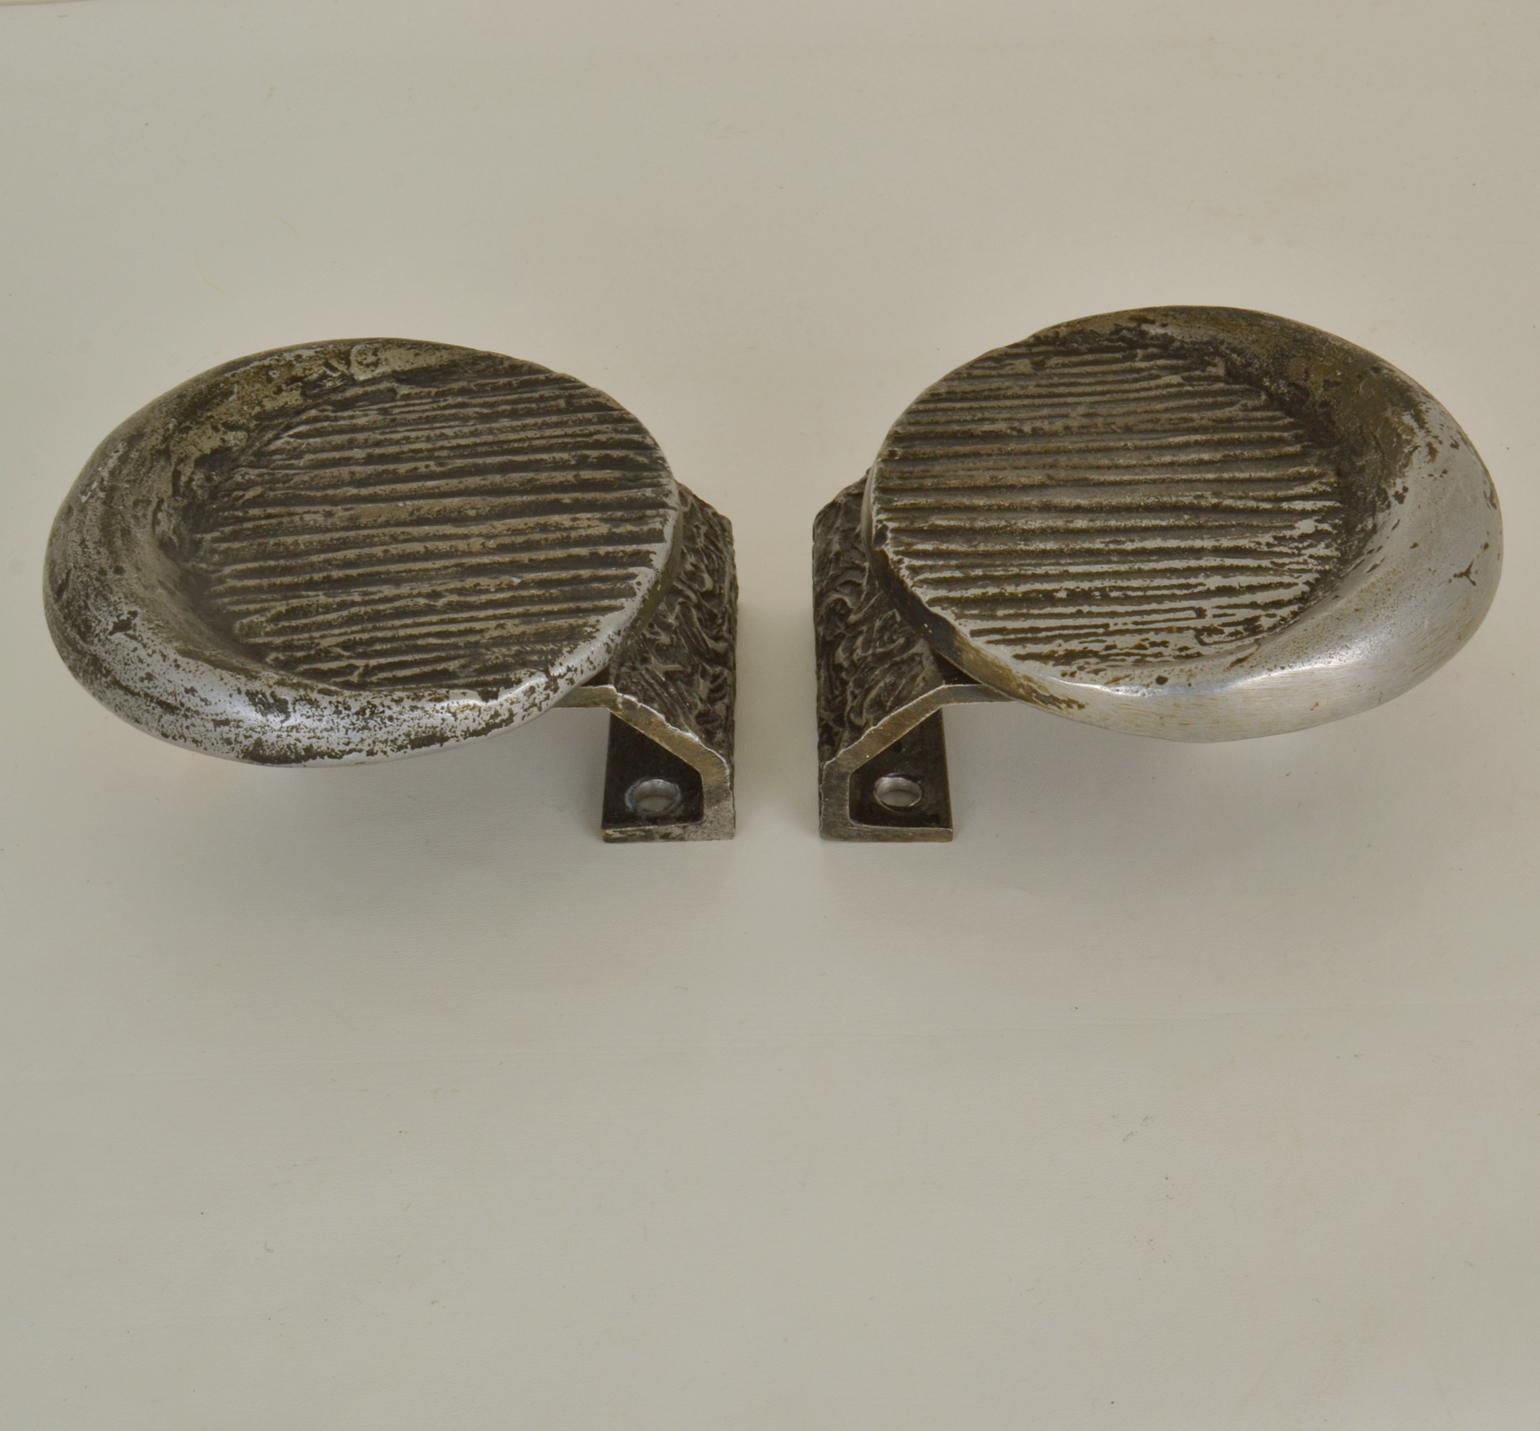 Pair of Brutalist round push and pull door handles with relief. cast in aluminum with a original patina giving the relief depth. These artistic door features work on both exterior and interior doors; on both sides of a single door or next to each